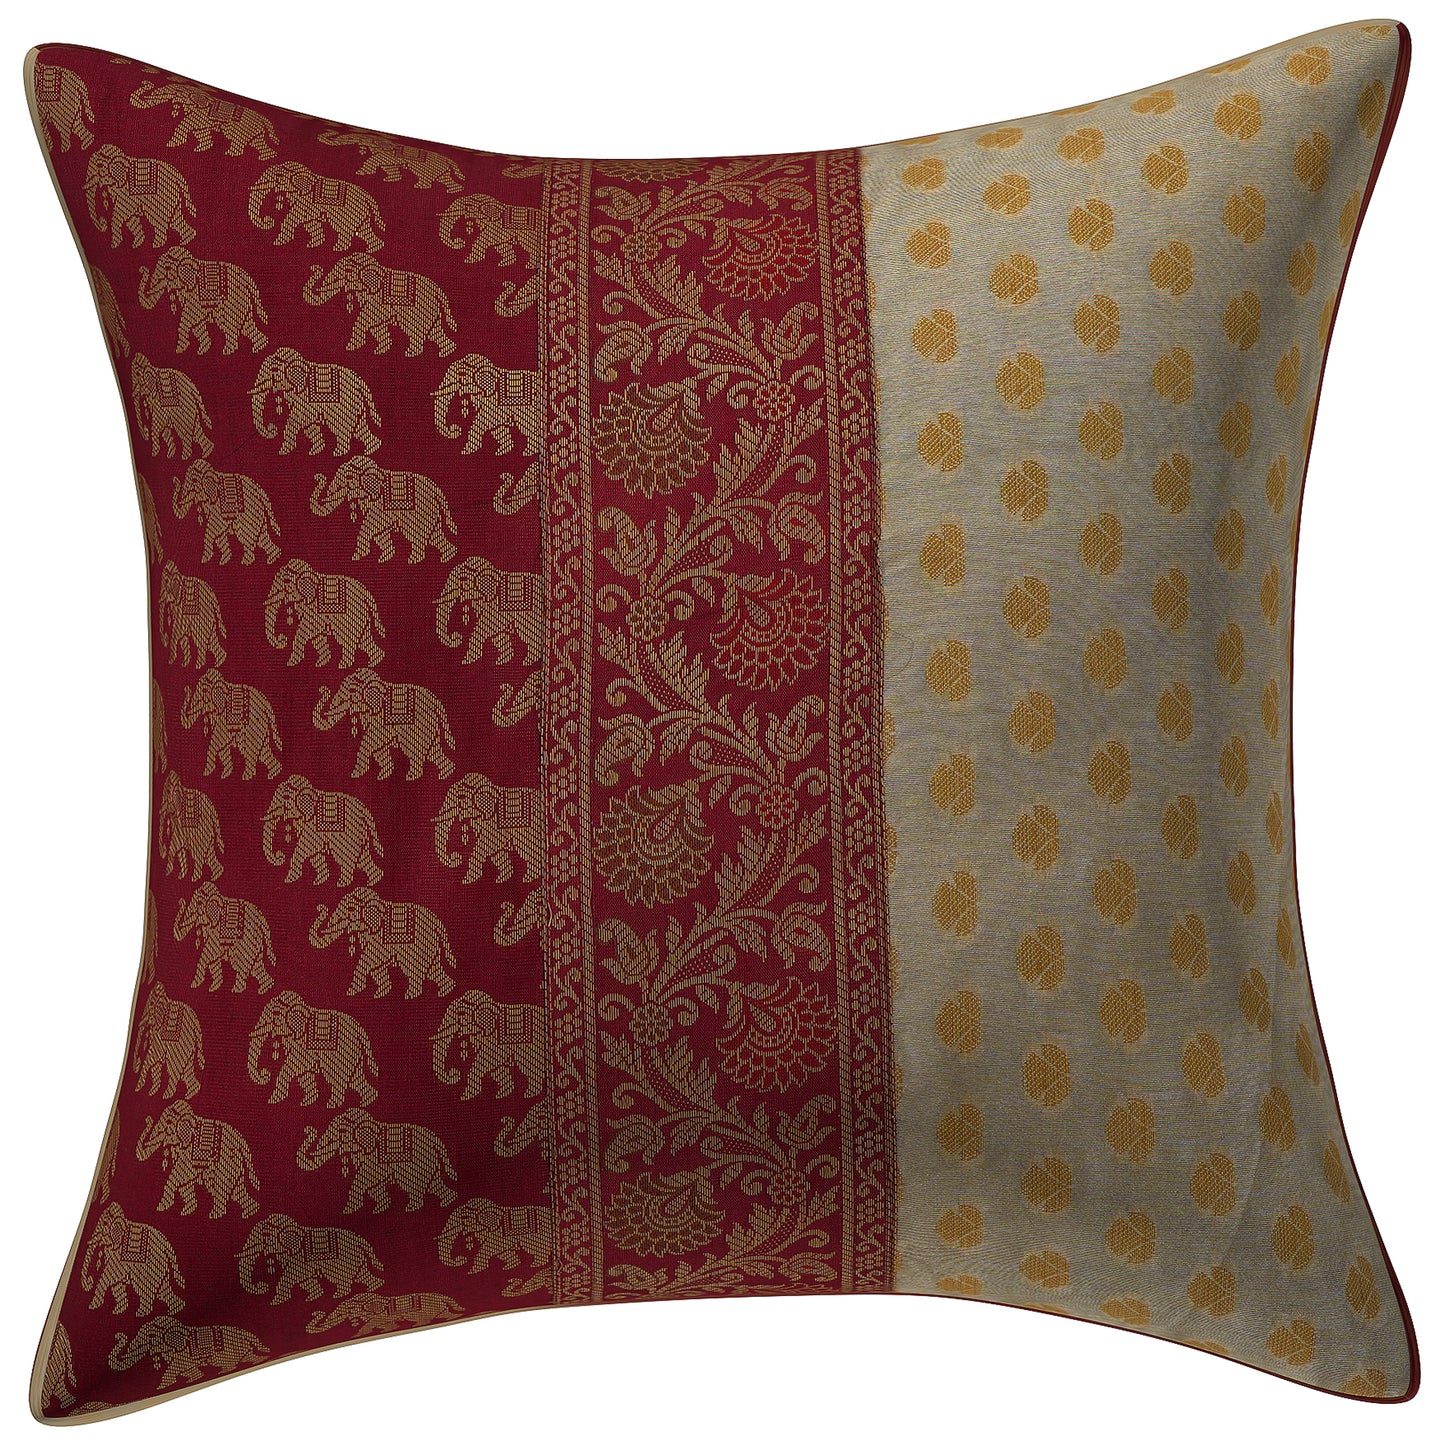 Indian Ethnic Brocade Silk Off White & Maroon Elephant cushion Cover Throw Pillow for Couch Sofa Home Décor Pillow Cover 16X16 In Set 2 Pc